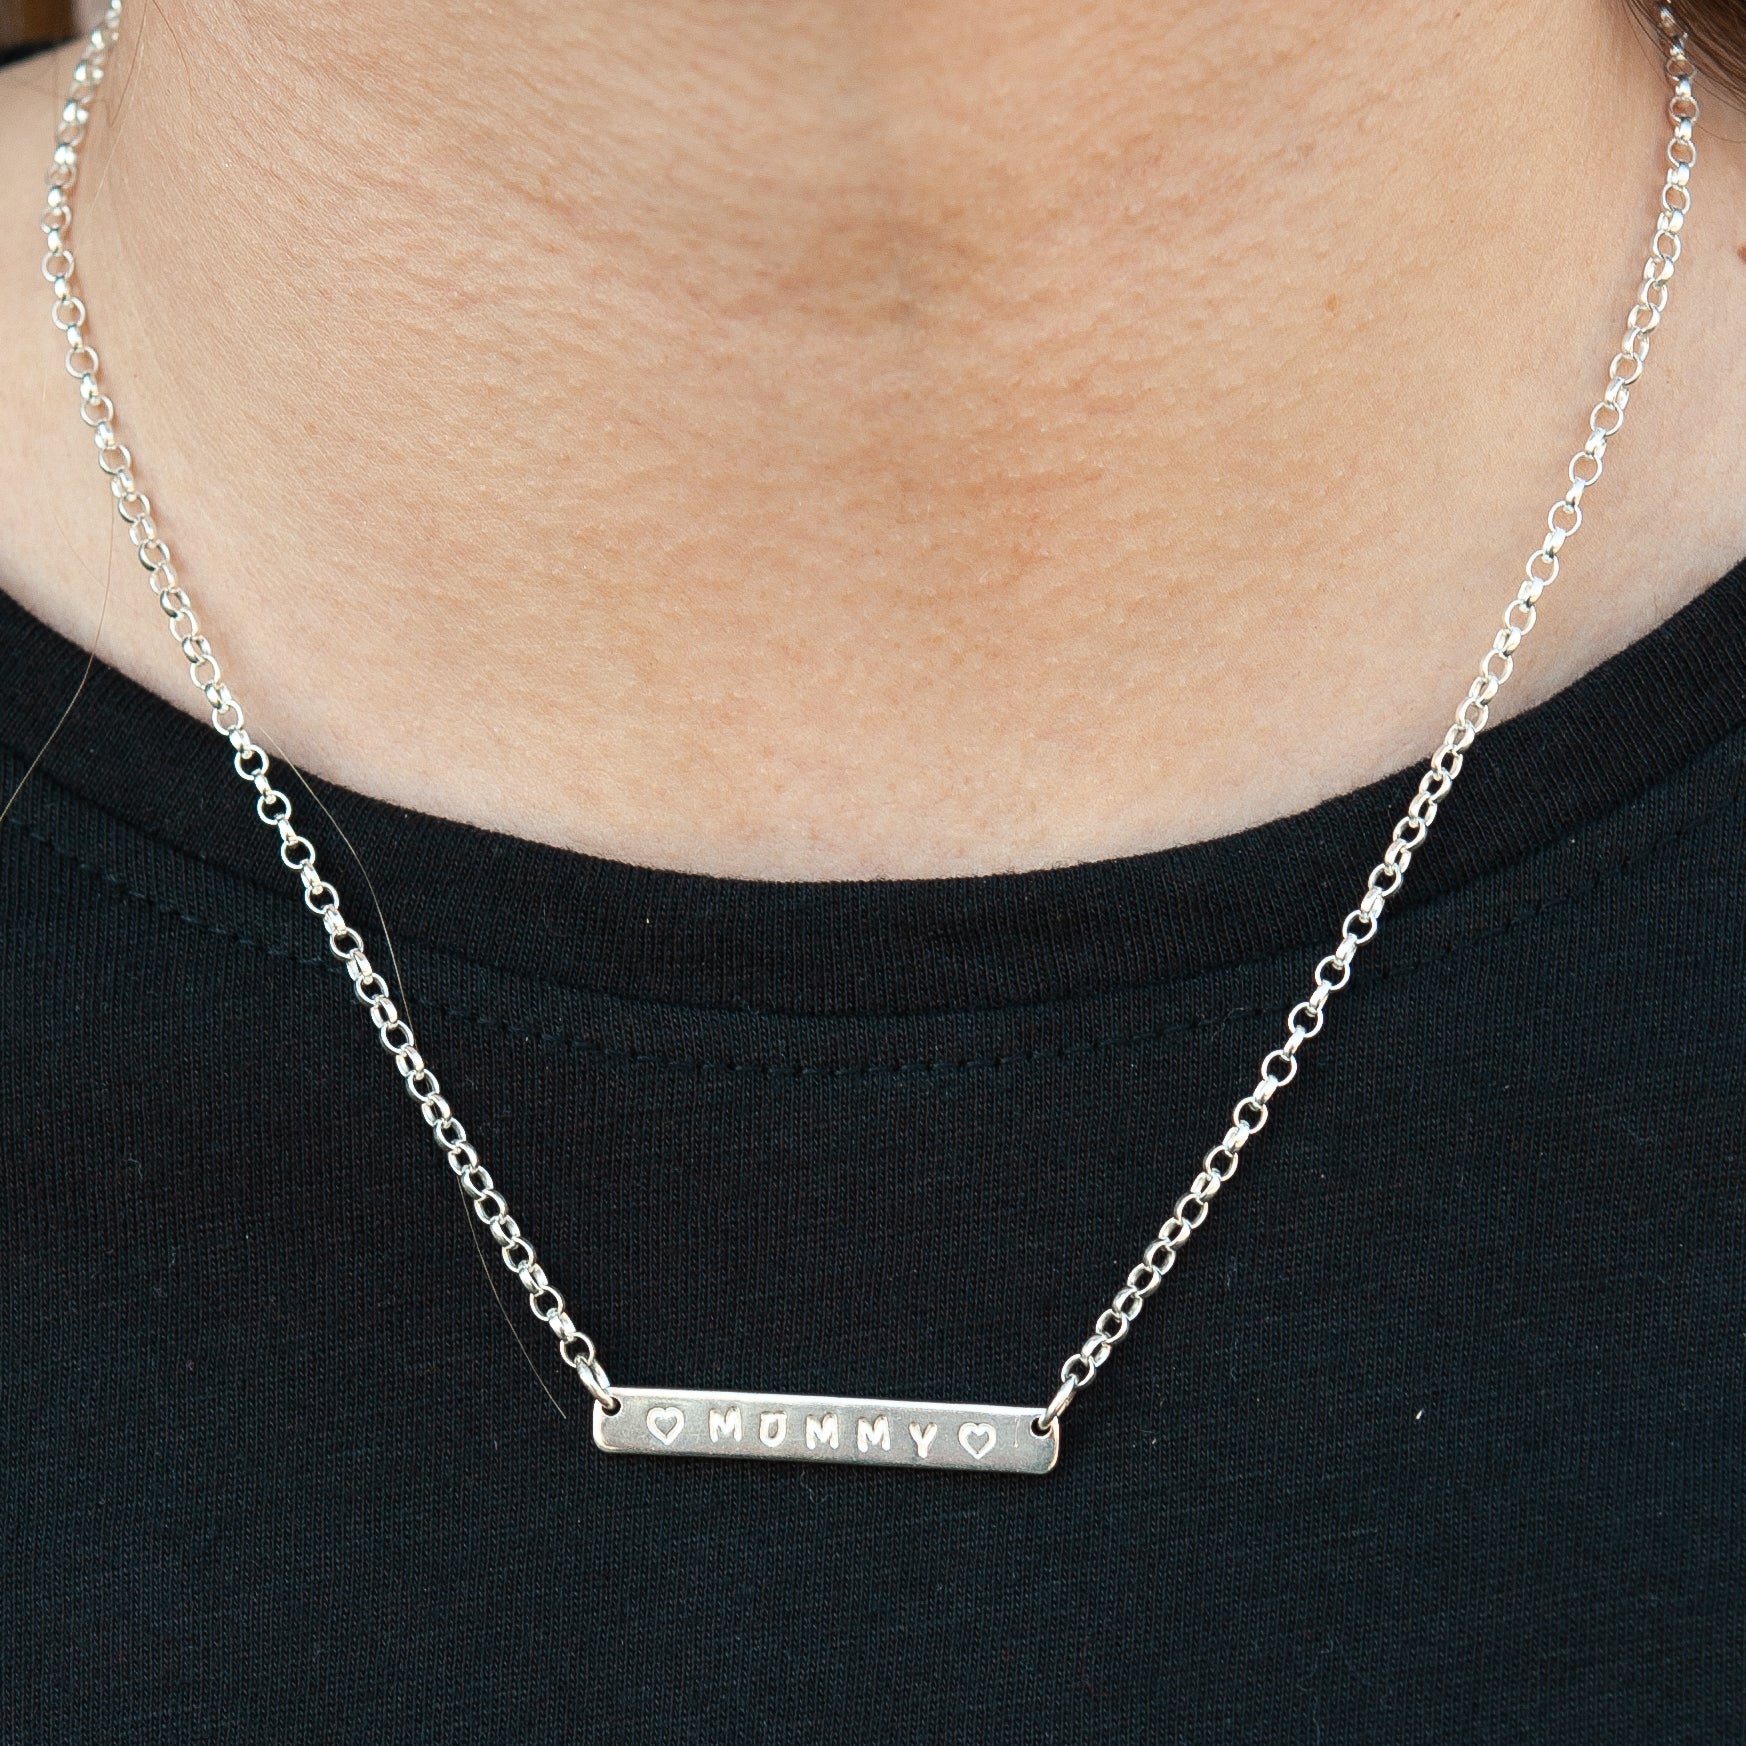 Belle & Bee sterling silver bar necklace